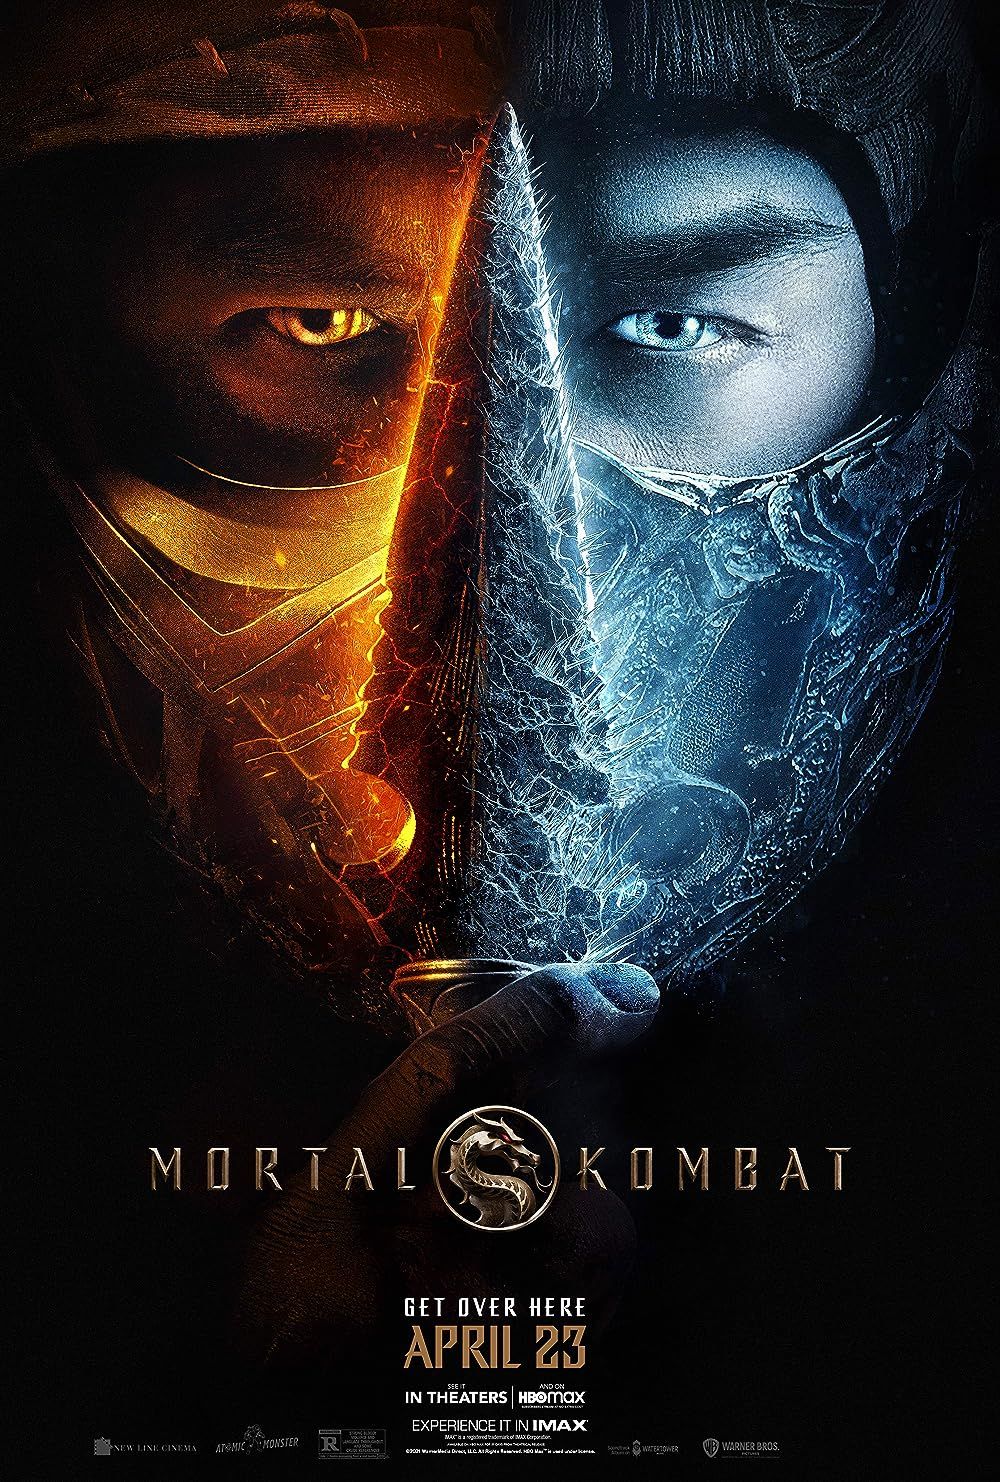 A split screen of Scorpion and Sub Zero's faces from the Mortal Kombat 2021 movie poster